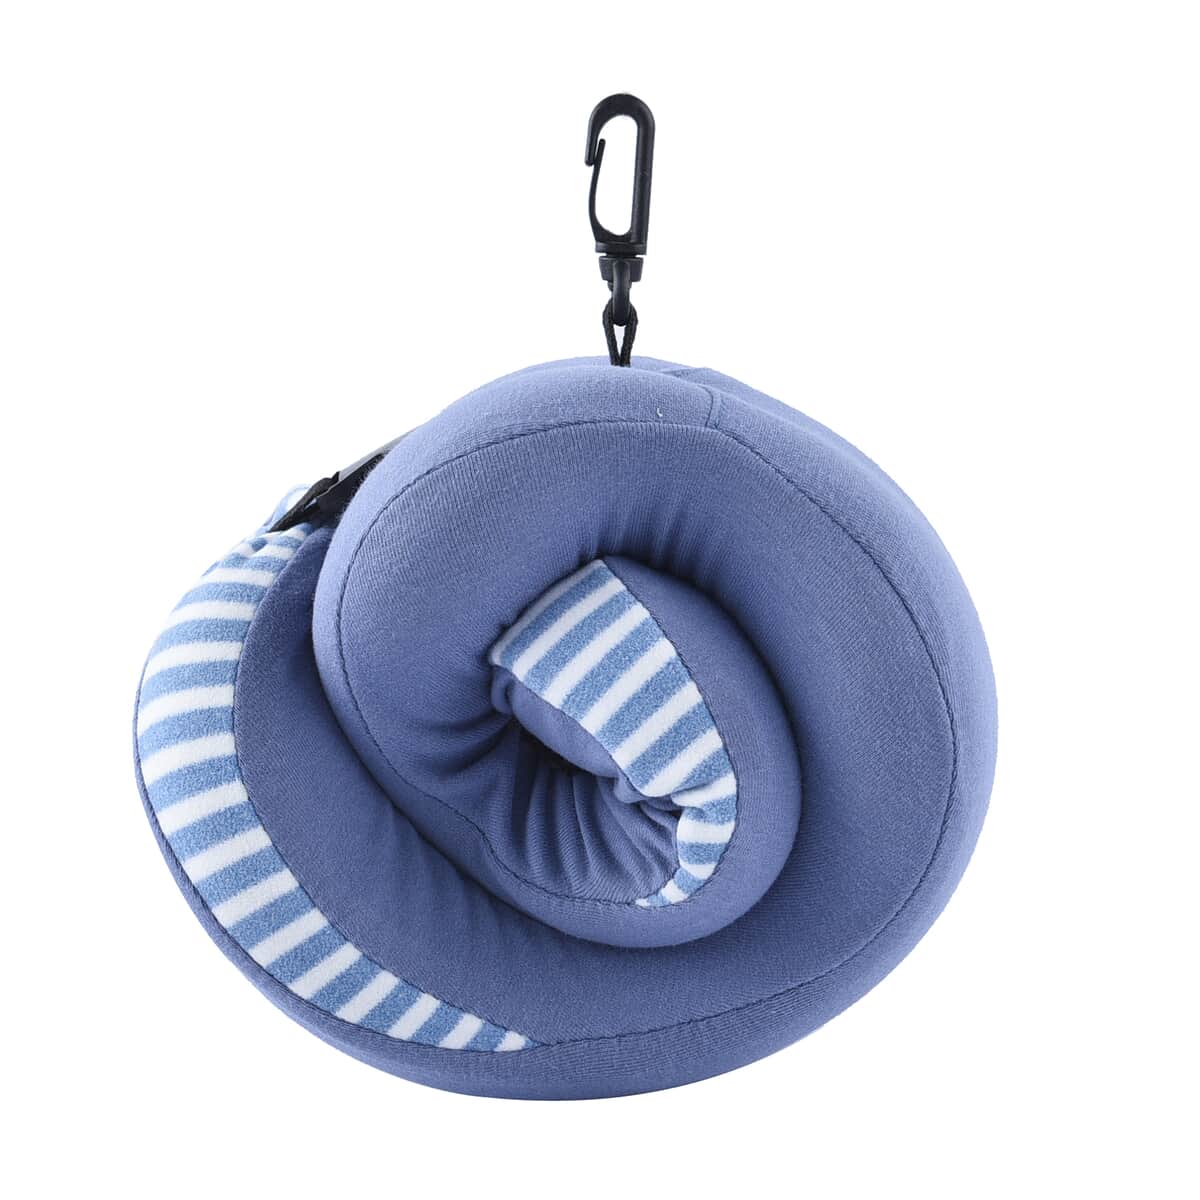 HOMESMART Blue Stripe Pattern Neck Pillow Can Be Rolled Up (8.66"x8.66") (100% Polyurethane Memory Foam) image number 5